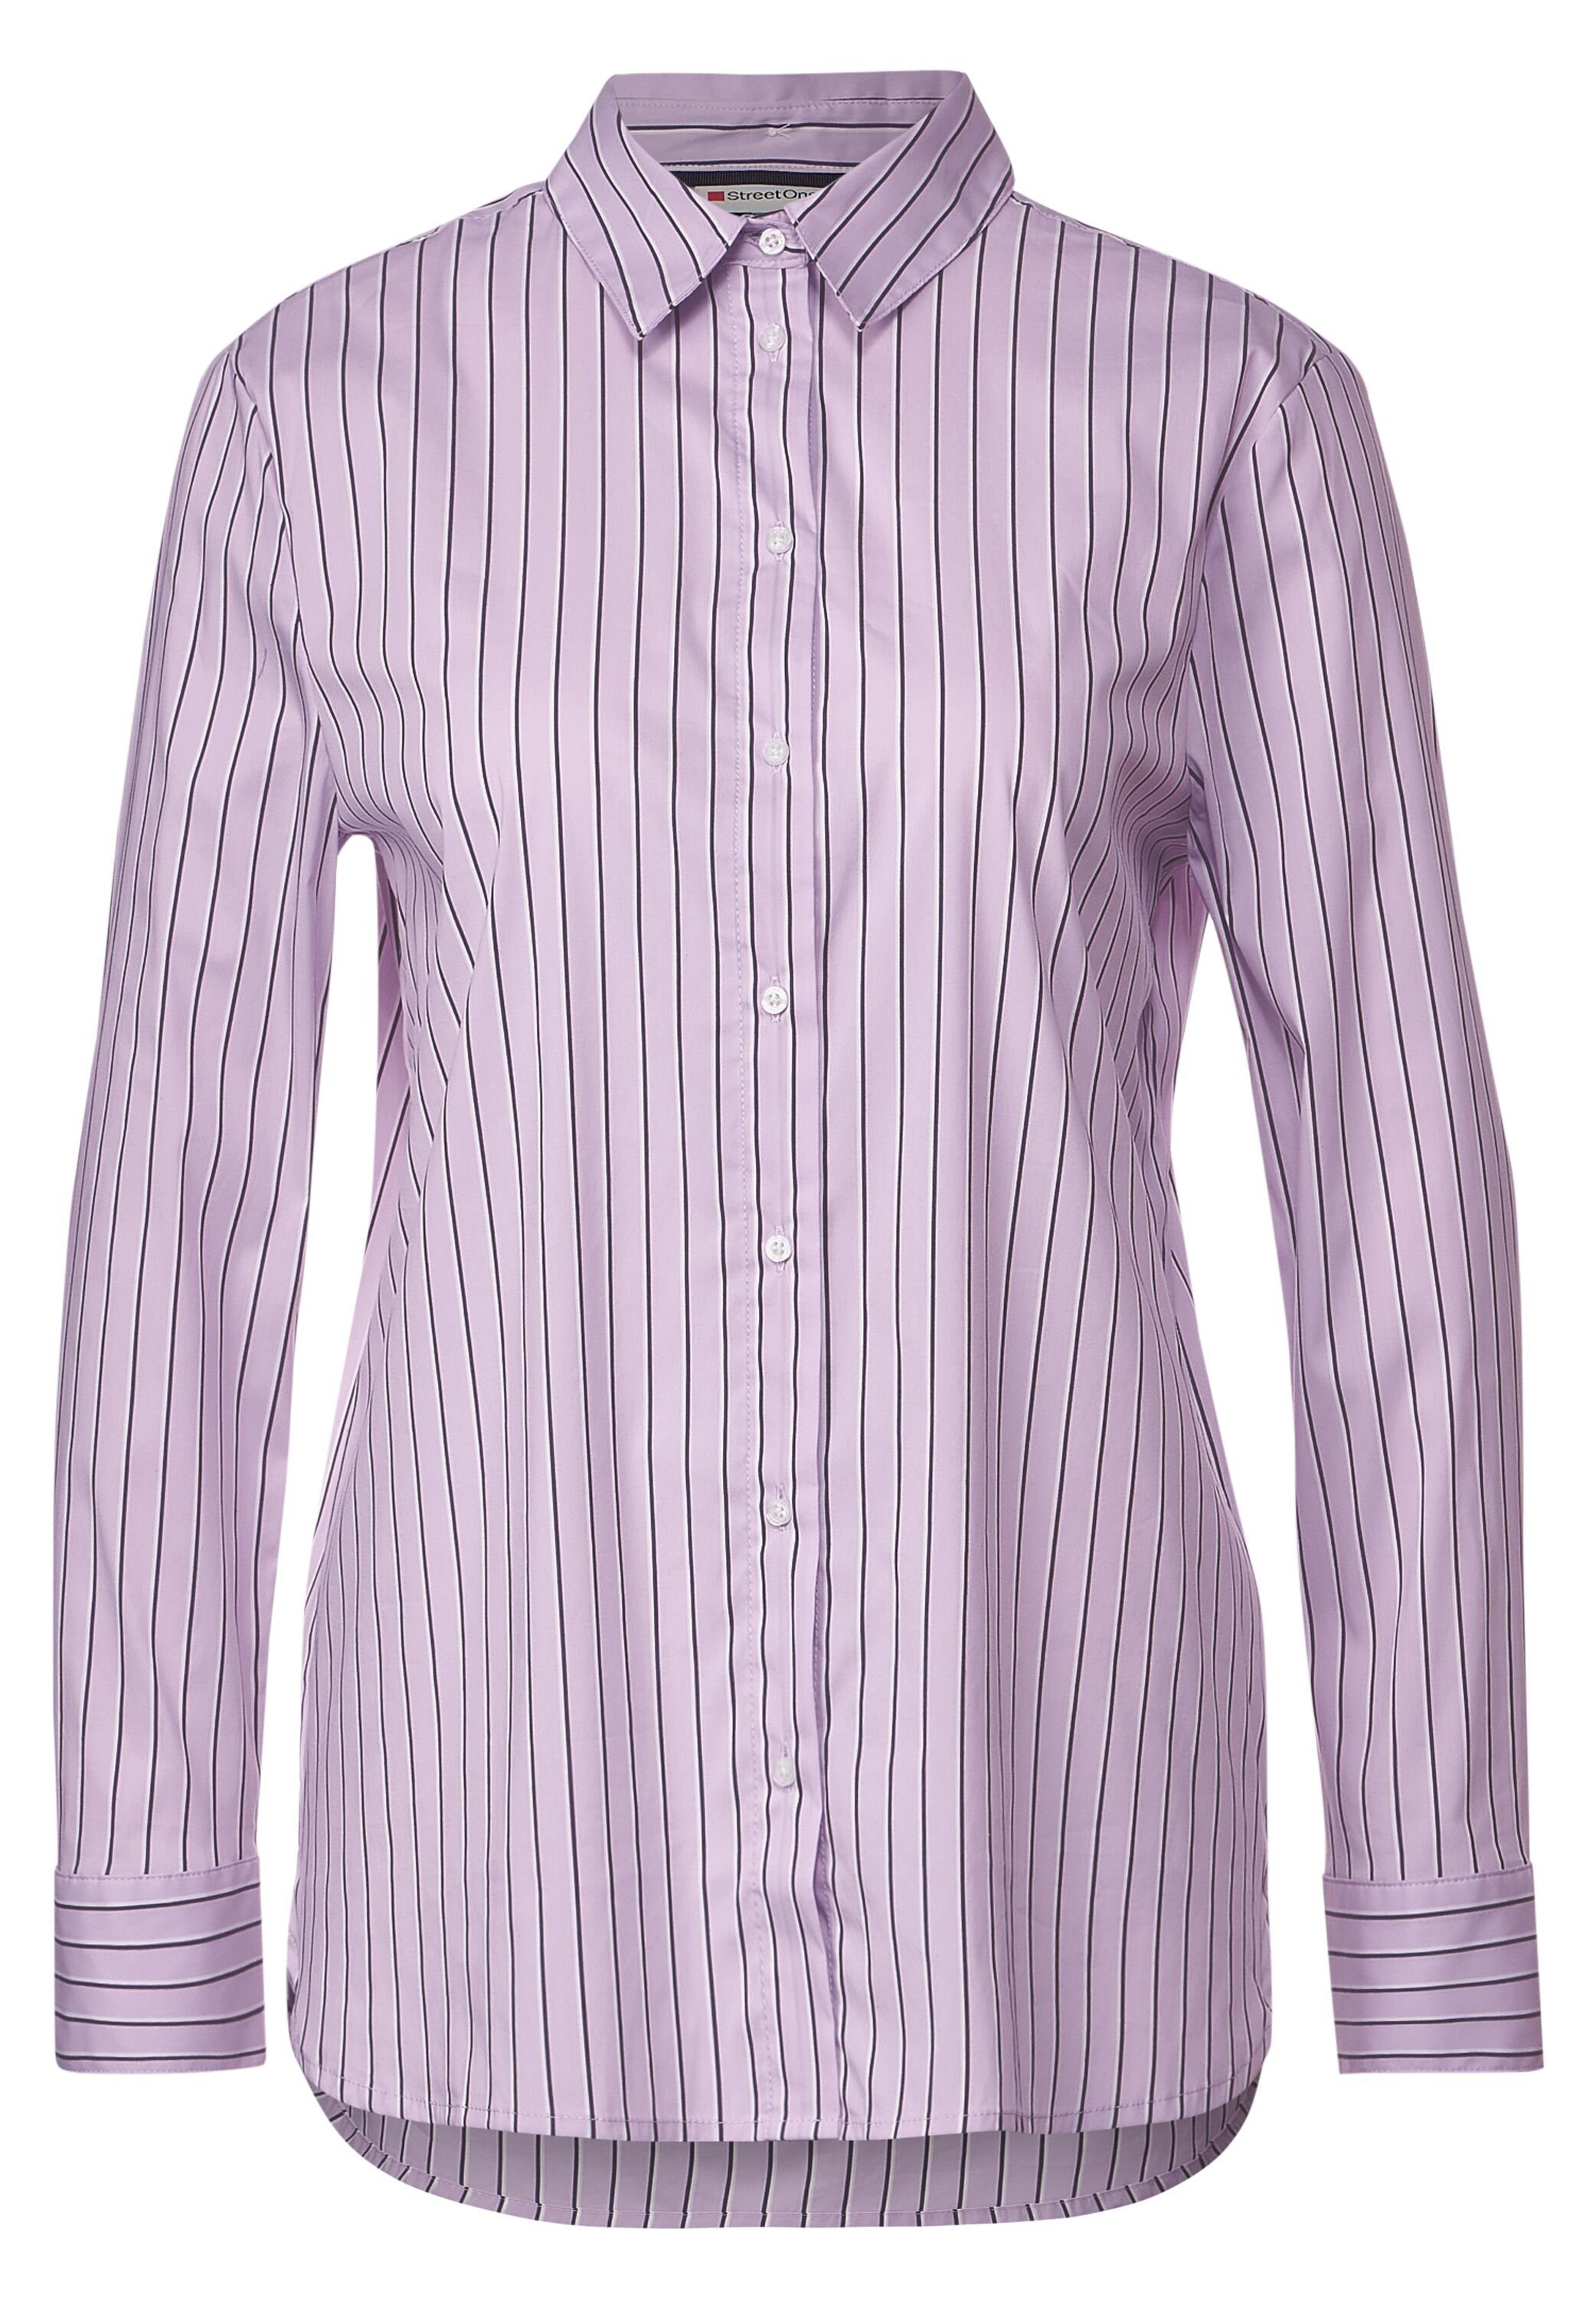 Streifenbluse Office LTD Longbluse blouse soft lilac Streifenmuster office ONE pure QR STREET Striped